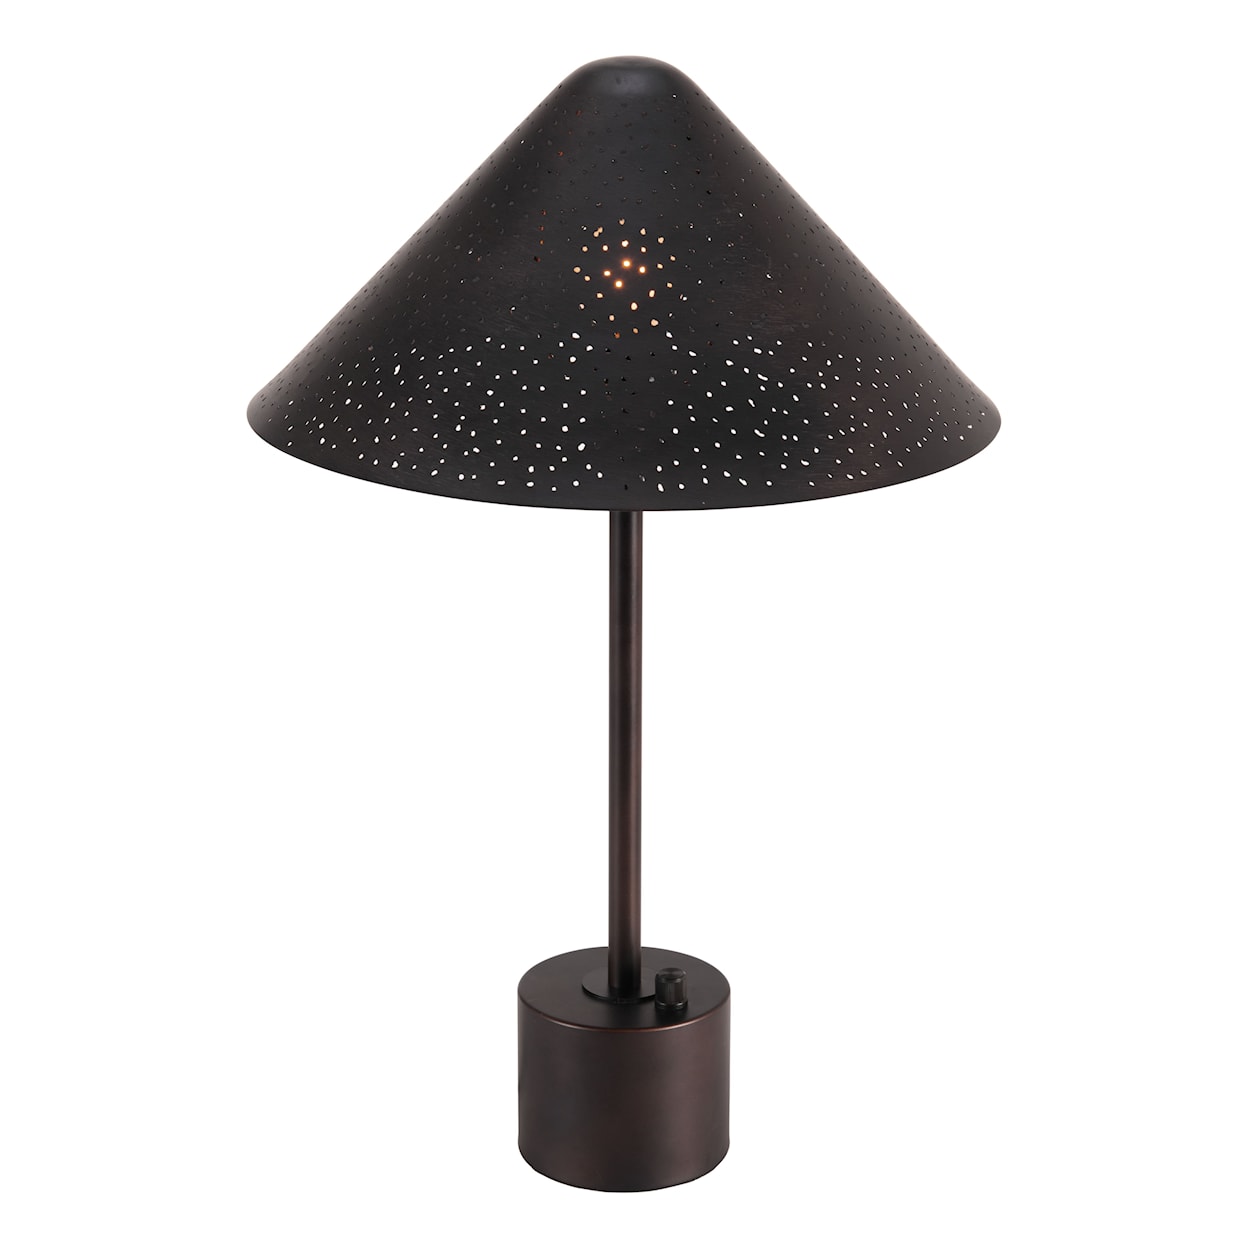 Zuo Cardo Lighting Collection Table Lamp